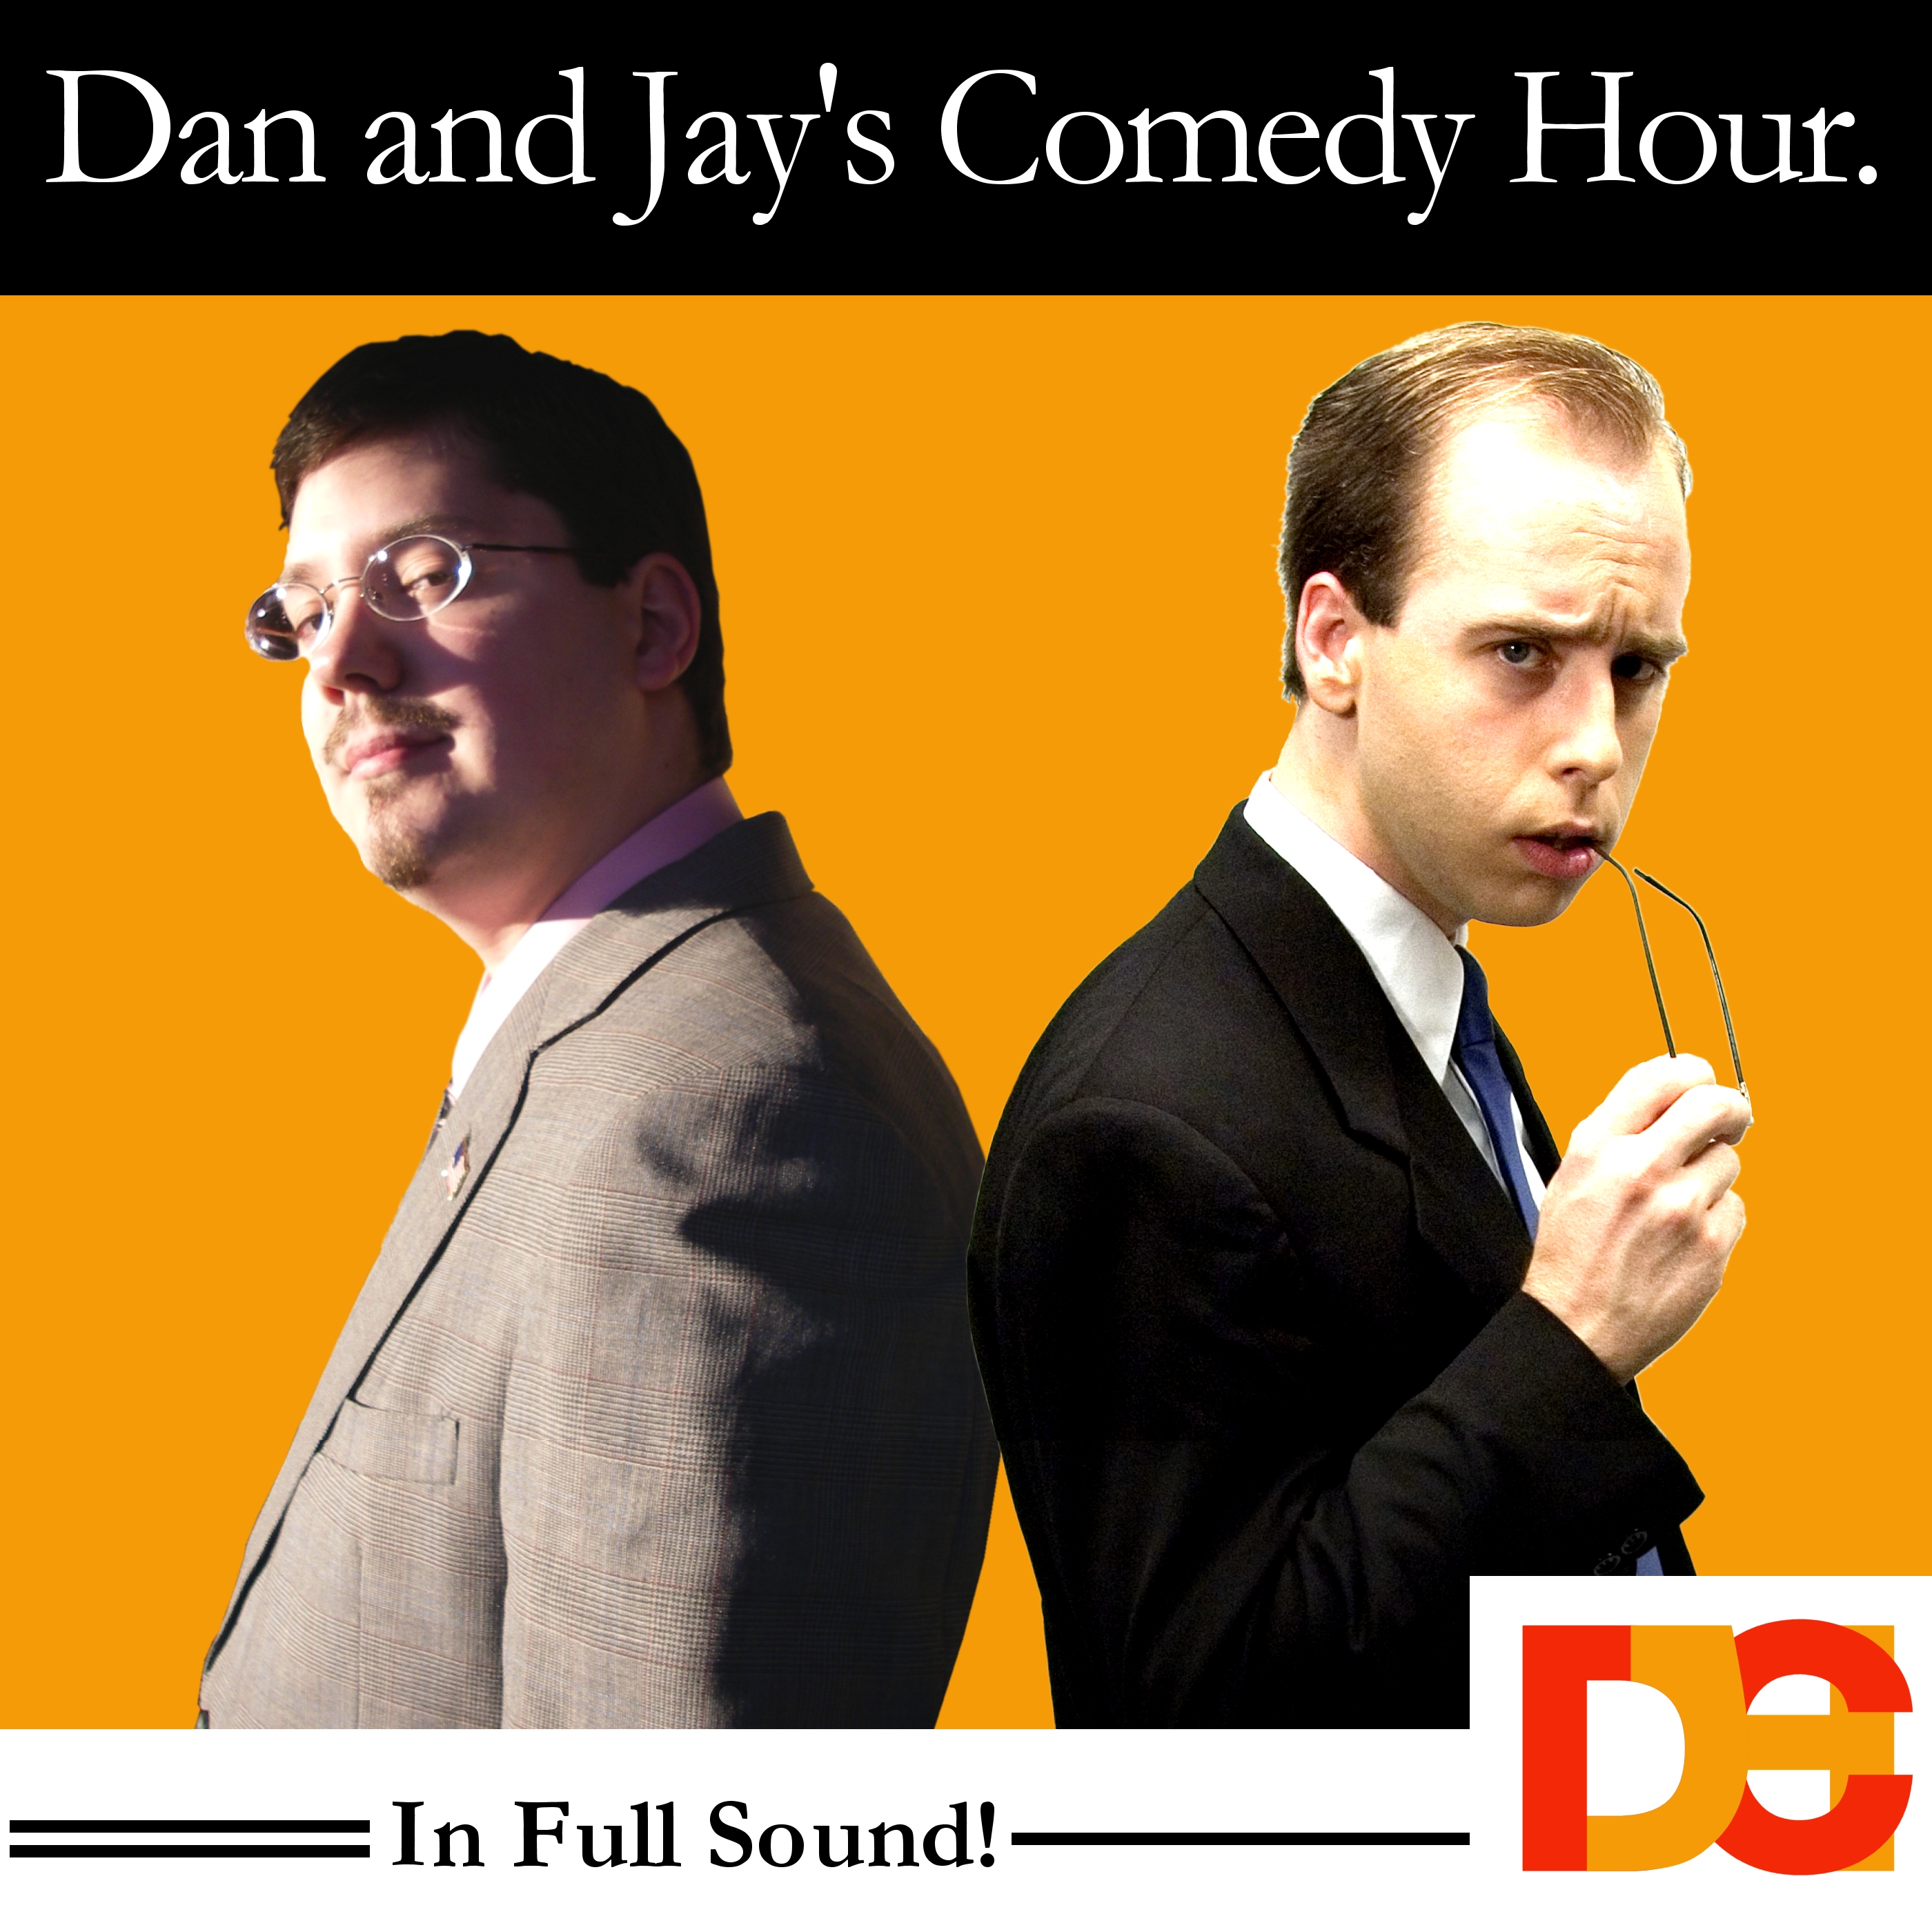 Dan and Jay’s Comedy Hour.  The Podcast.